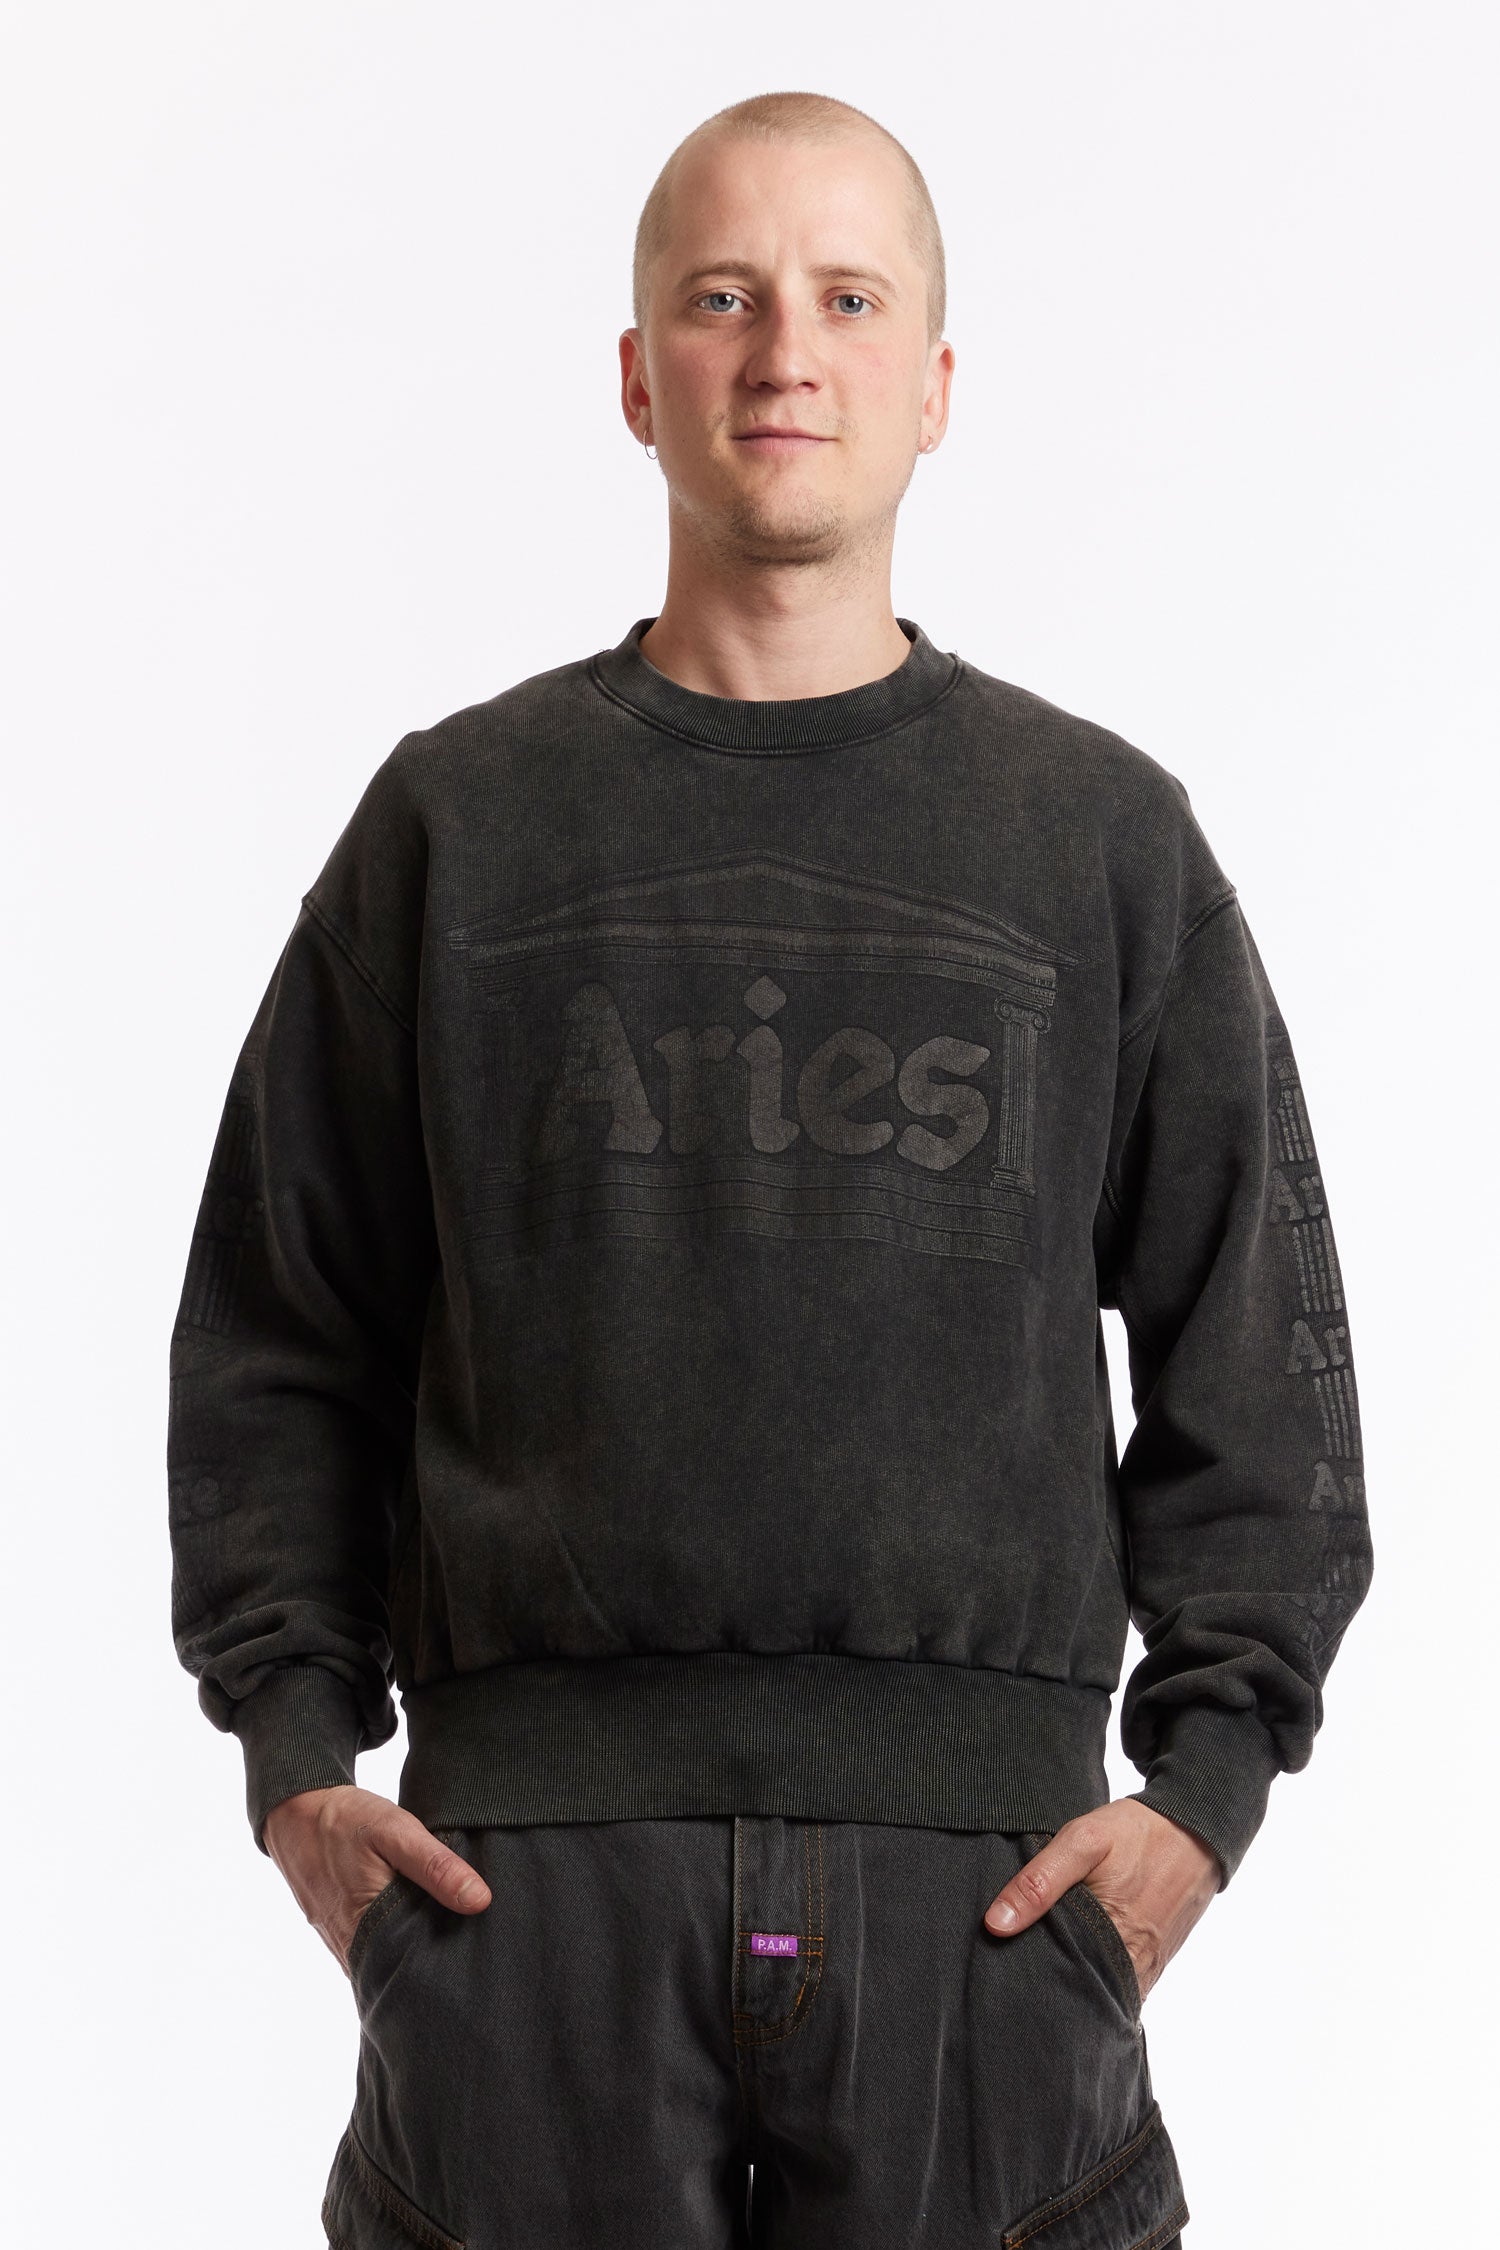 The ARIES - AGED ANCIENT COLUMN SWEATSHIRT BLACK available online with global shipping, and in PAM Stores Melbourne and Sydney.